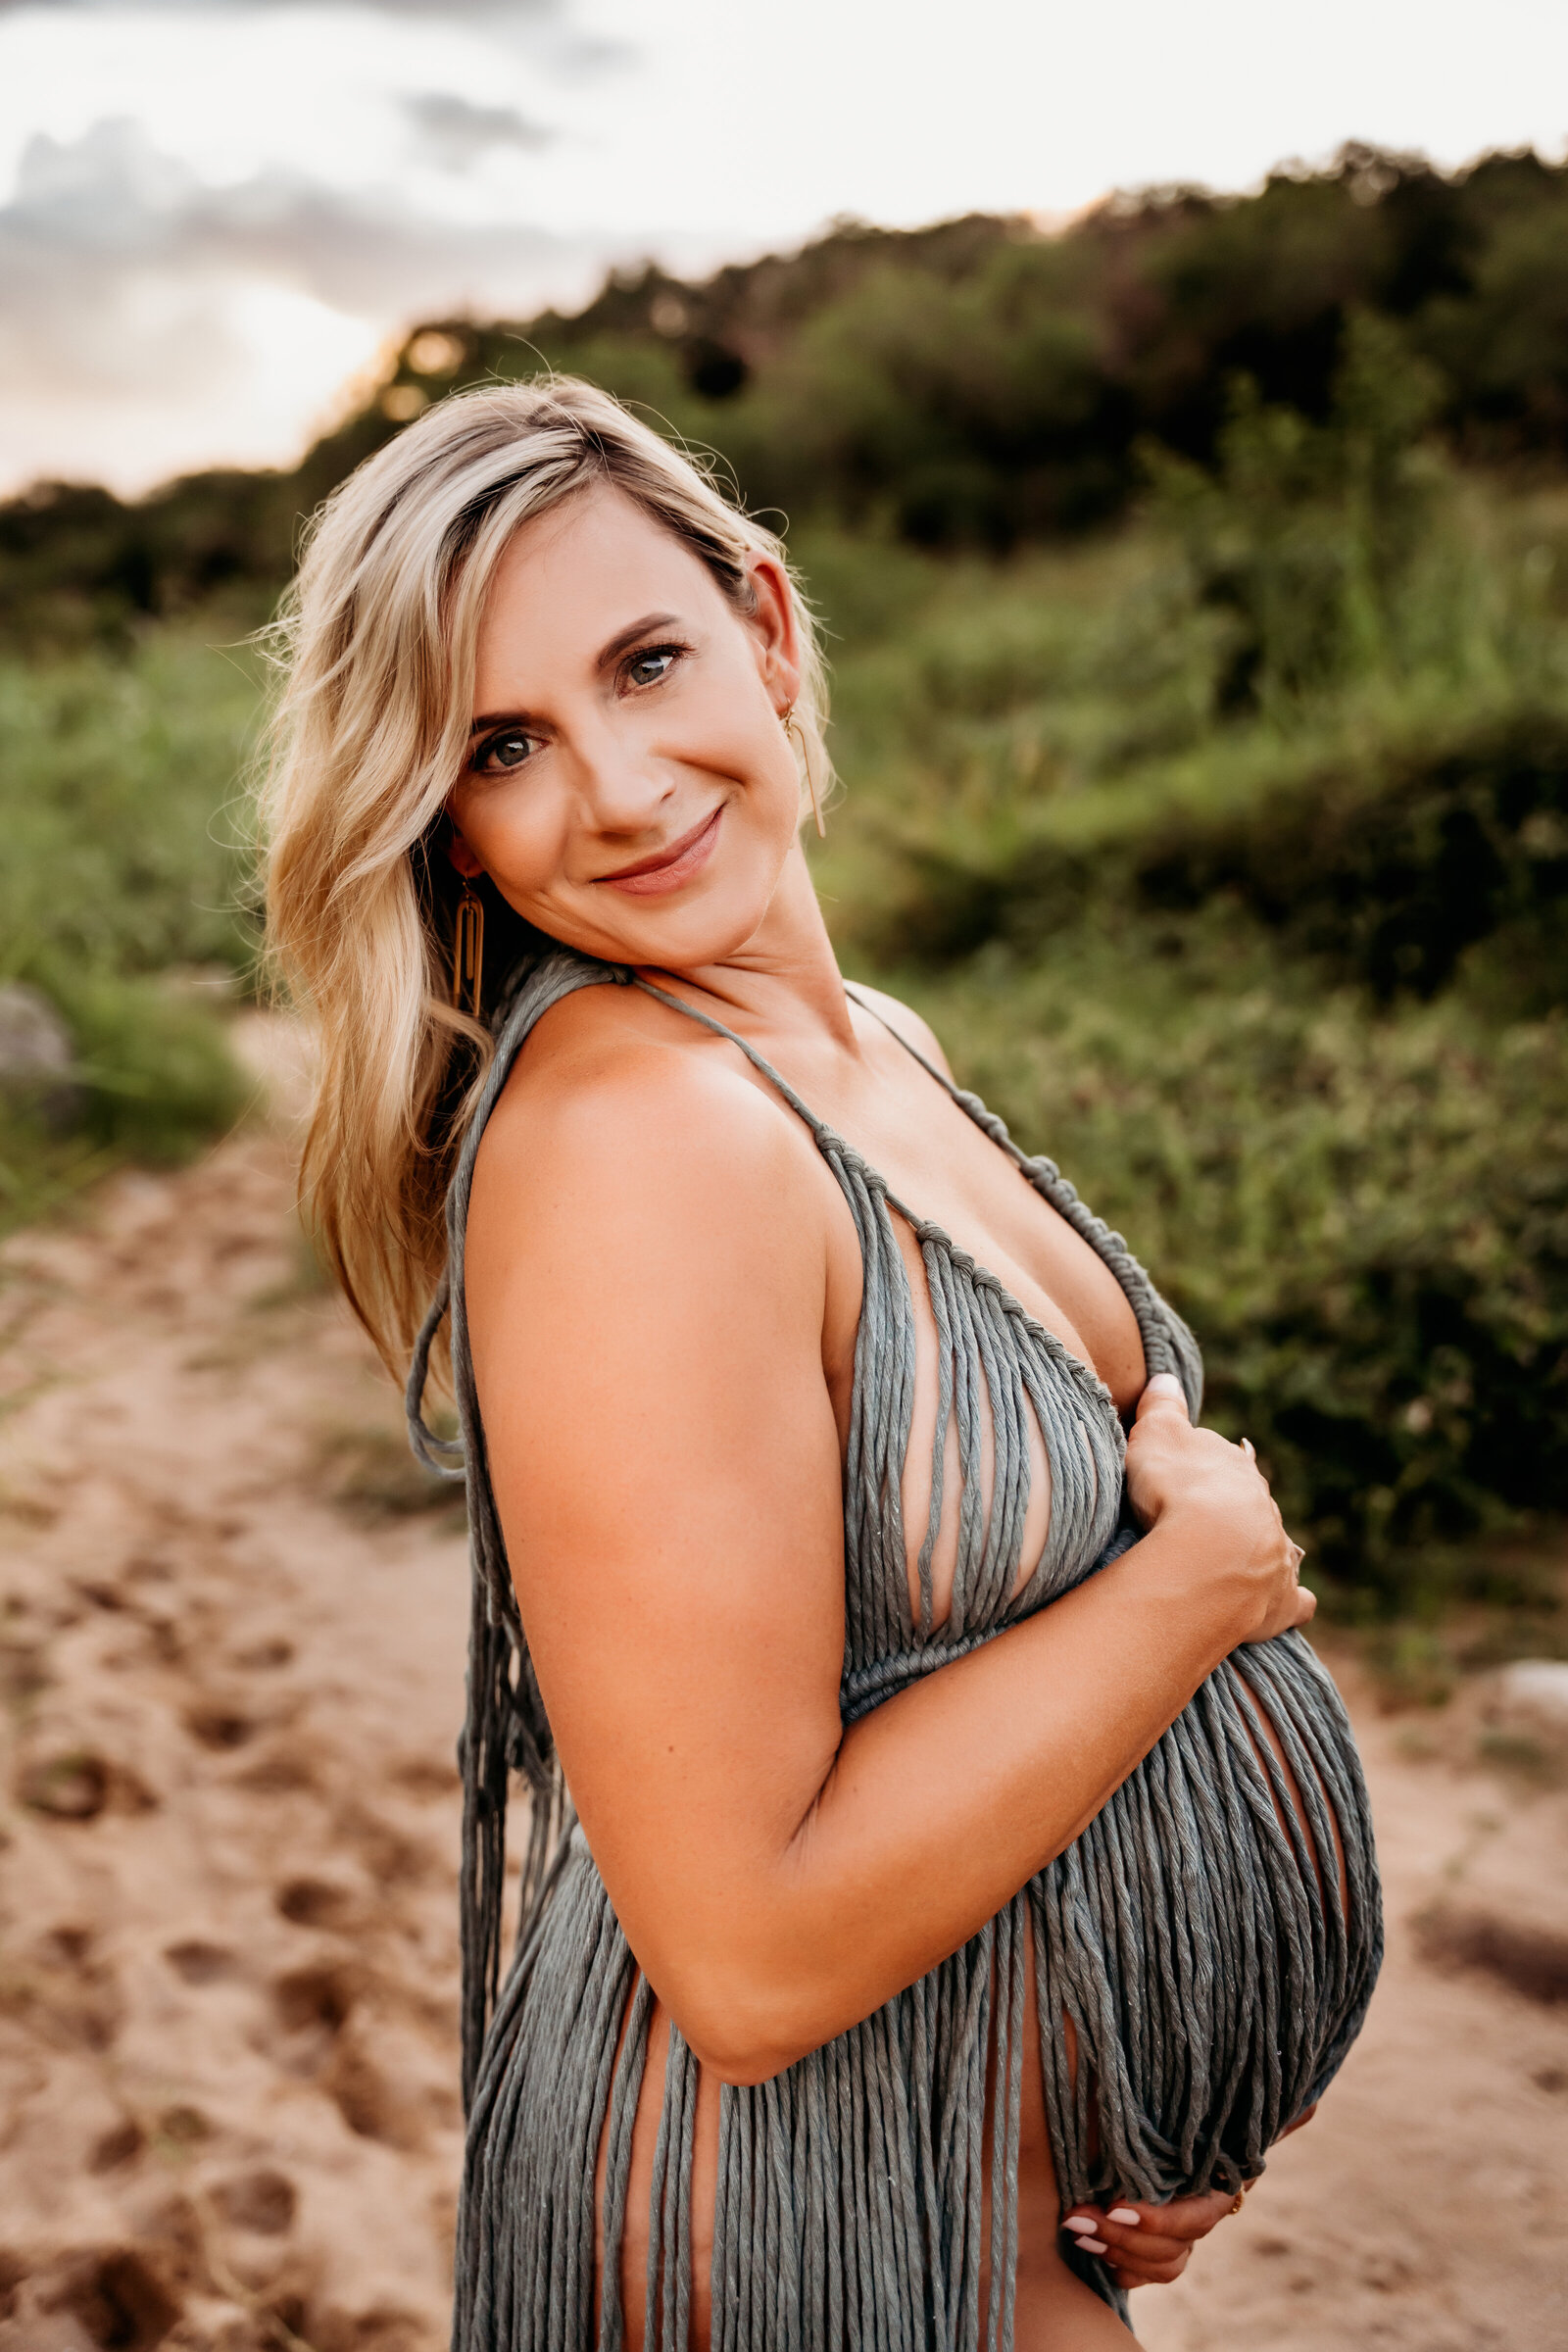 Maternity Photographer, an expectant mother wears a lacy dress and smiles in anticipation, she is at the river bank